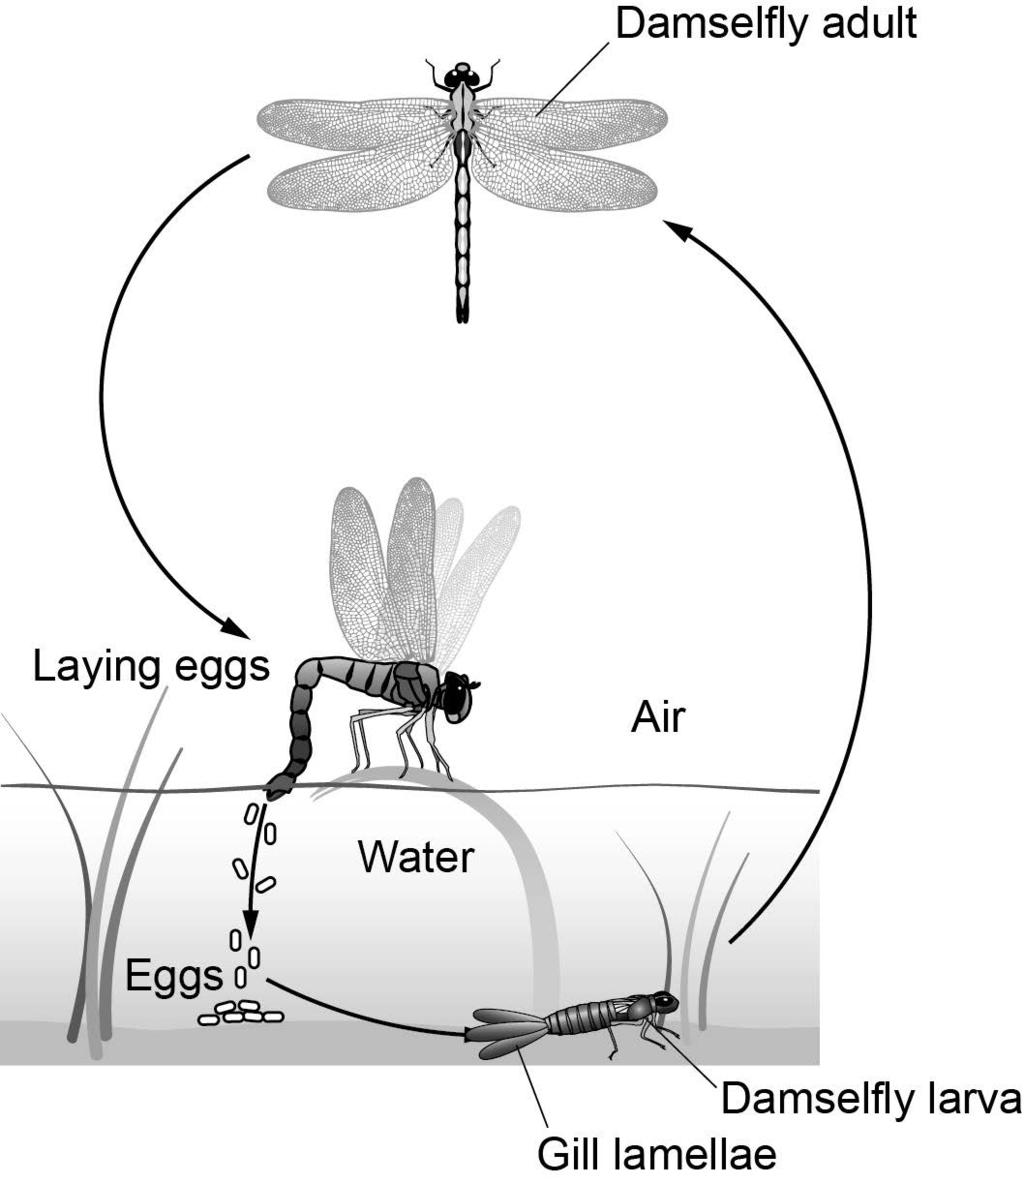 26 0 9 Figure 4 shows the stages of development of an insect called a damselfly. Figure 4 0 9.